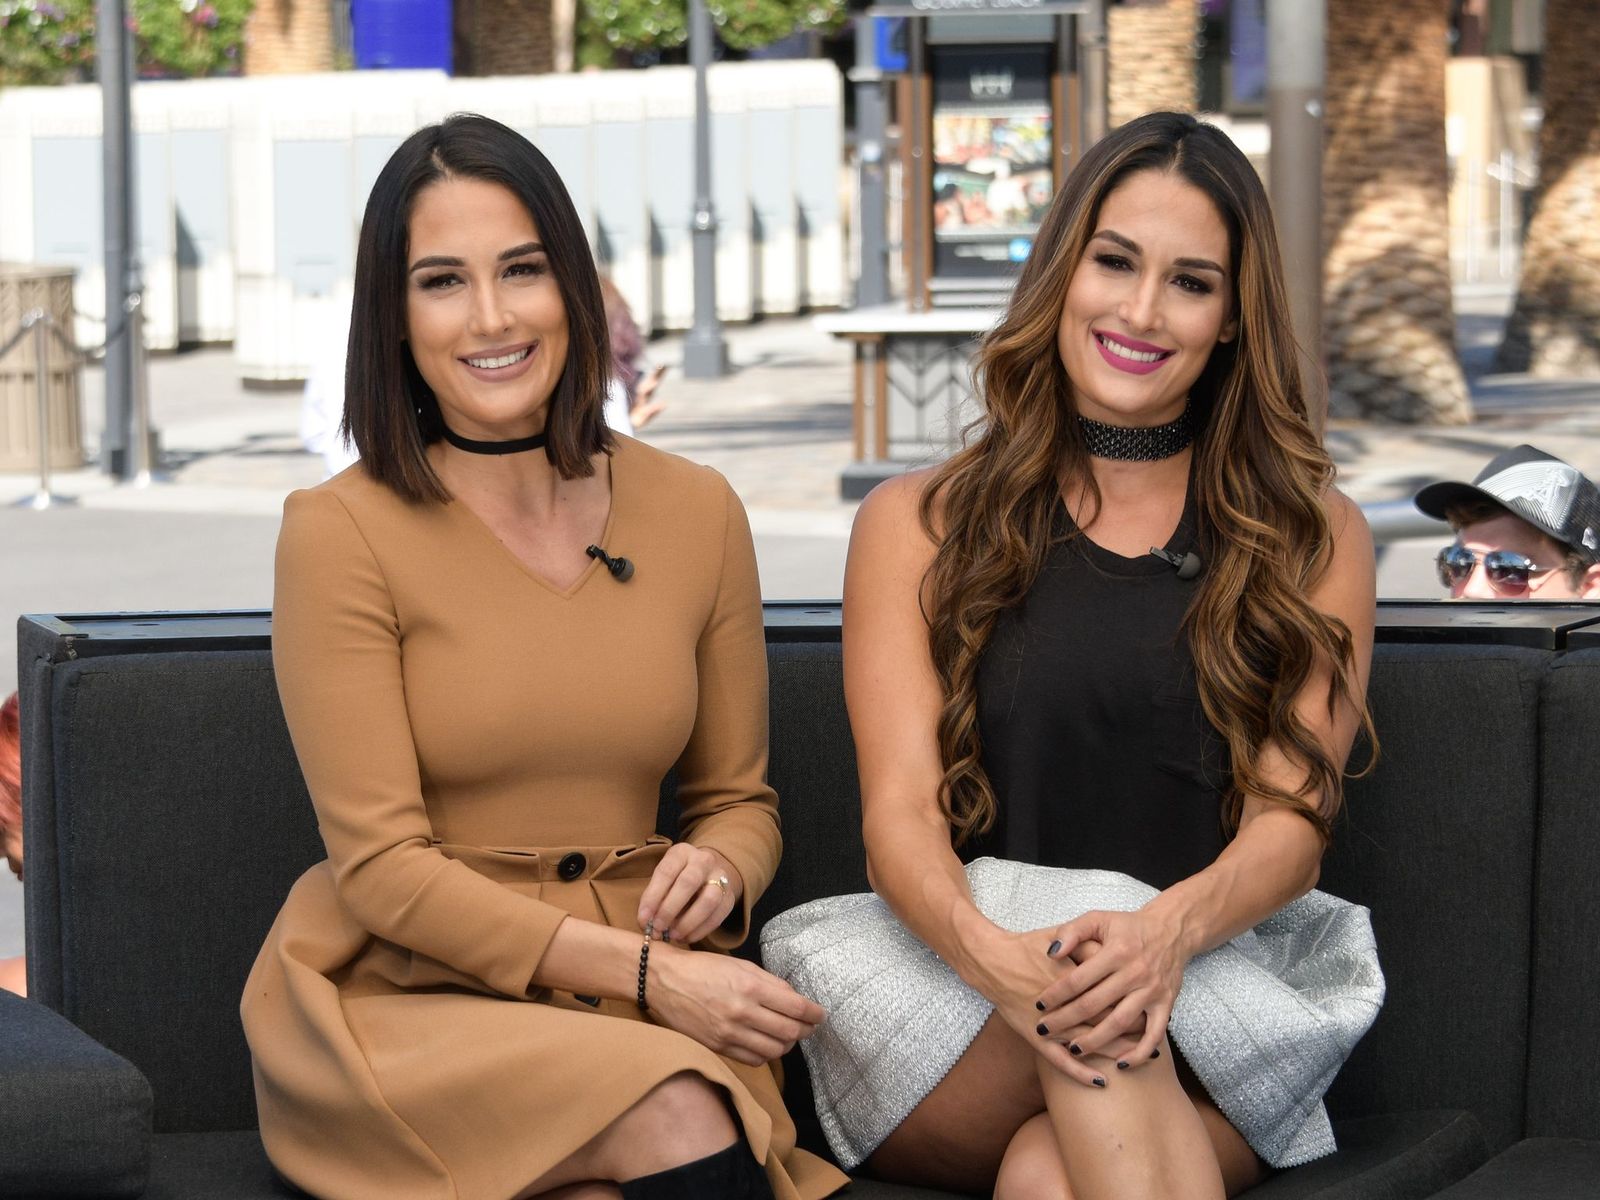 Brie Bella and Nikki Bella at Universal Studios Hollywood on October 3, 2016 | Photo: Getty Images